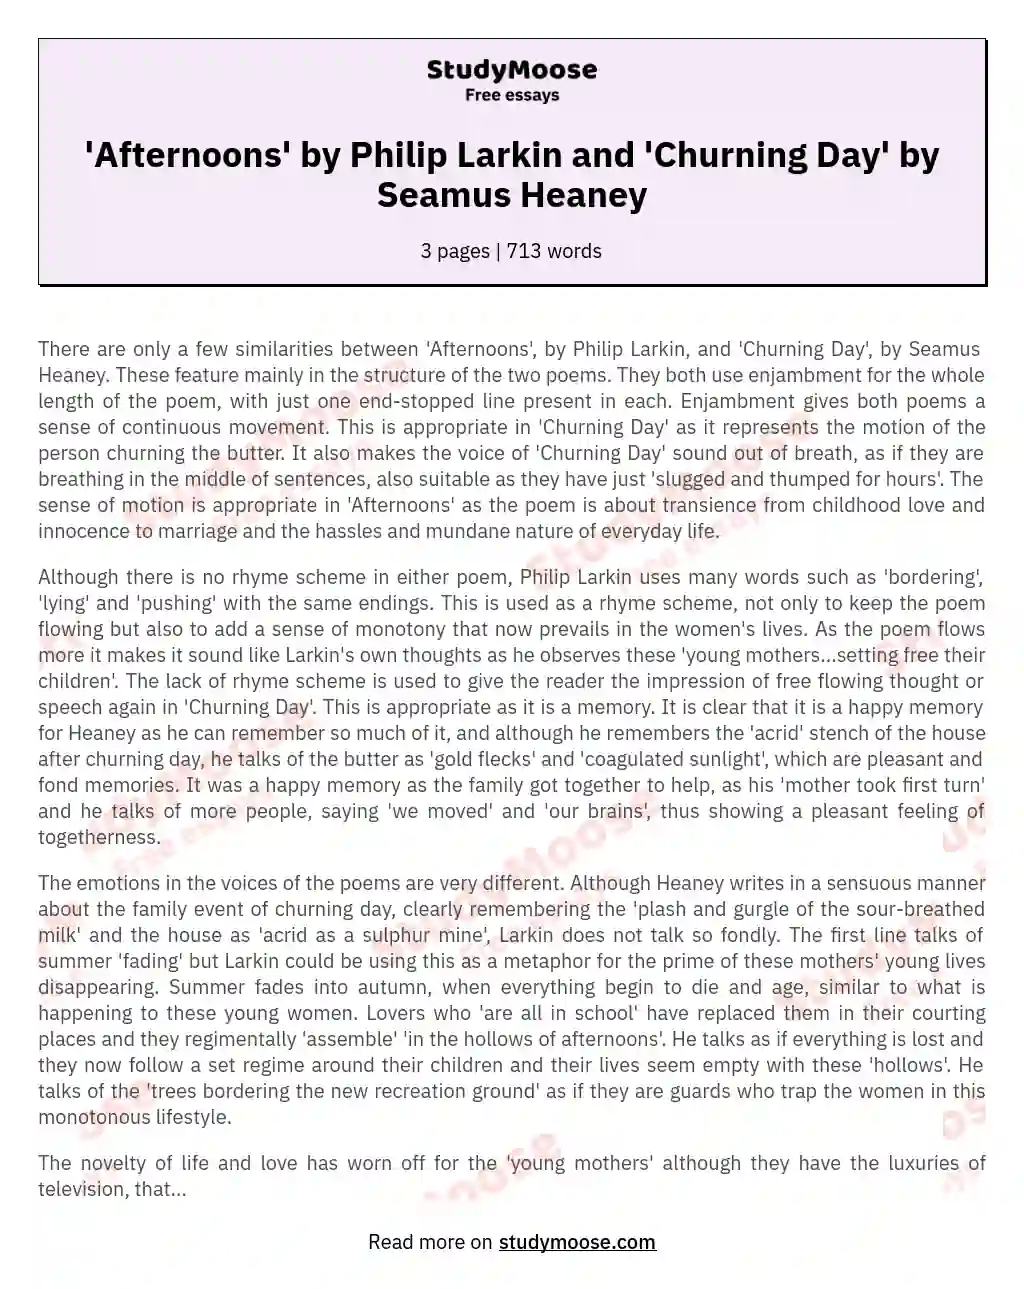 'Afternoons' by Philip Larkin and 'Churning Day' by Seamus Heaney